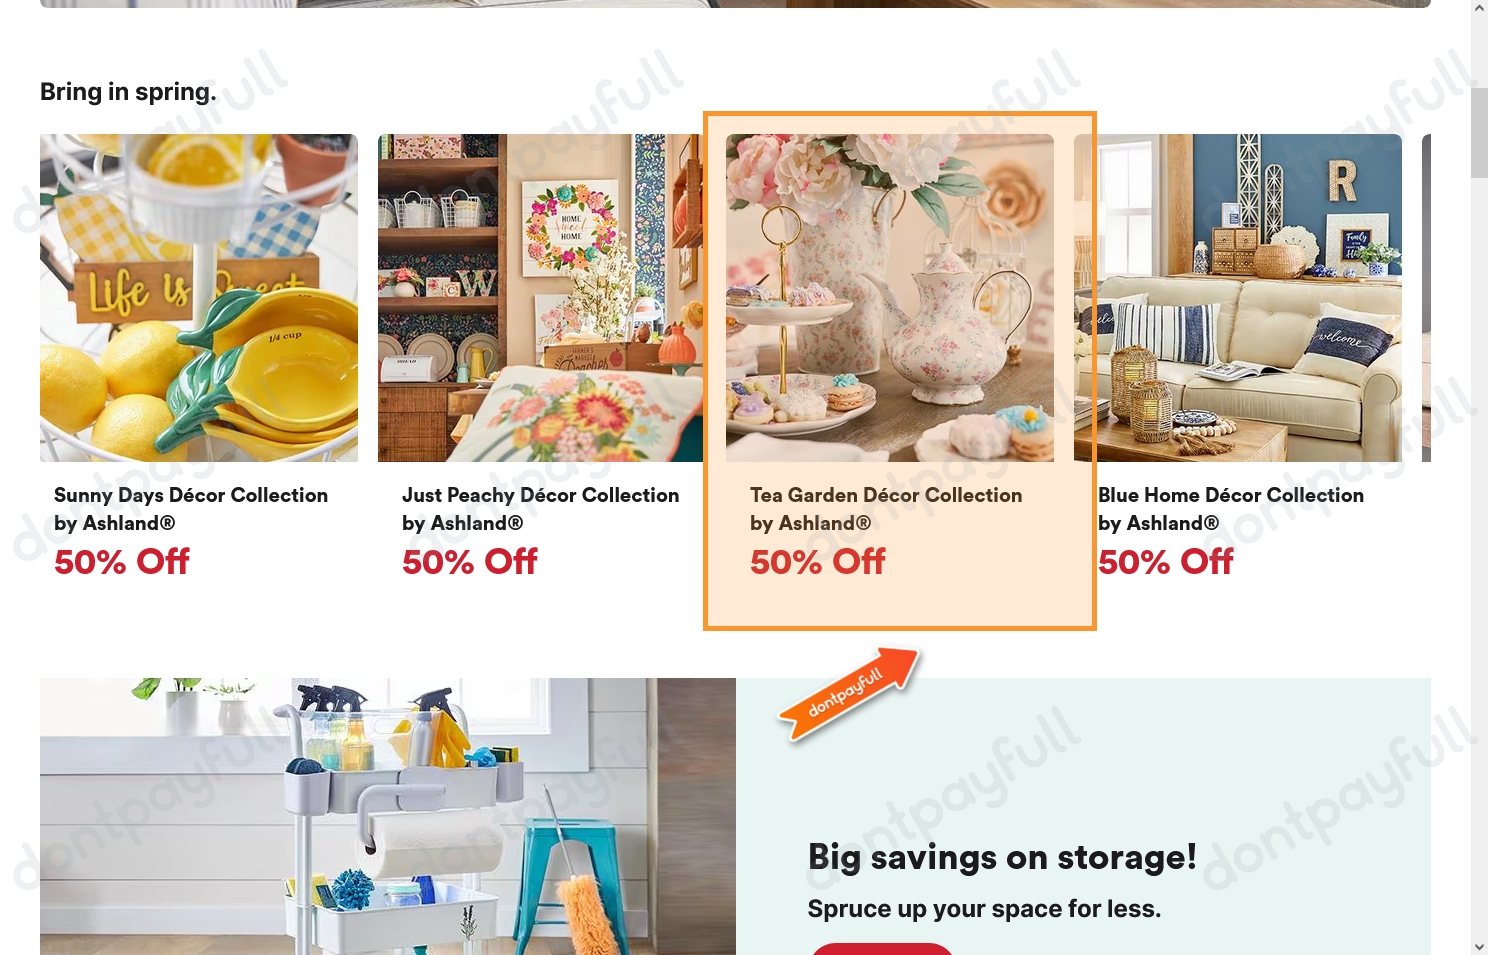 Michael's 50% off 1 regular item (Printable coupon) Ends July 14 